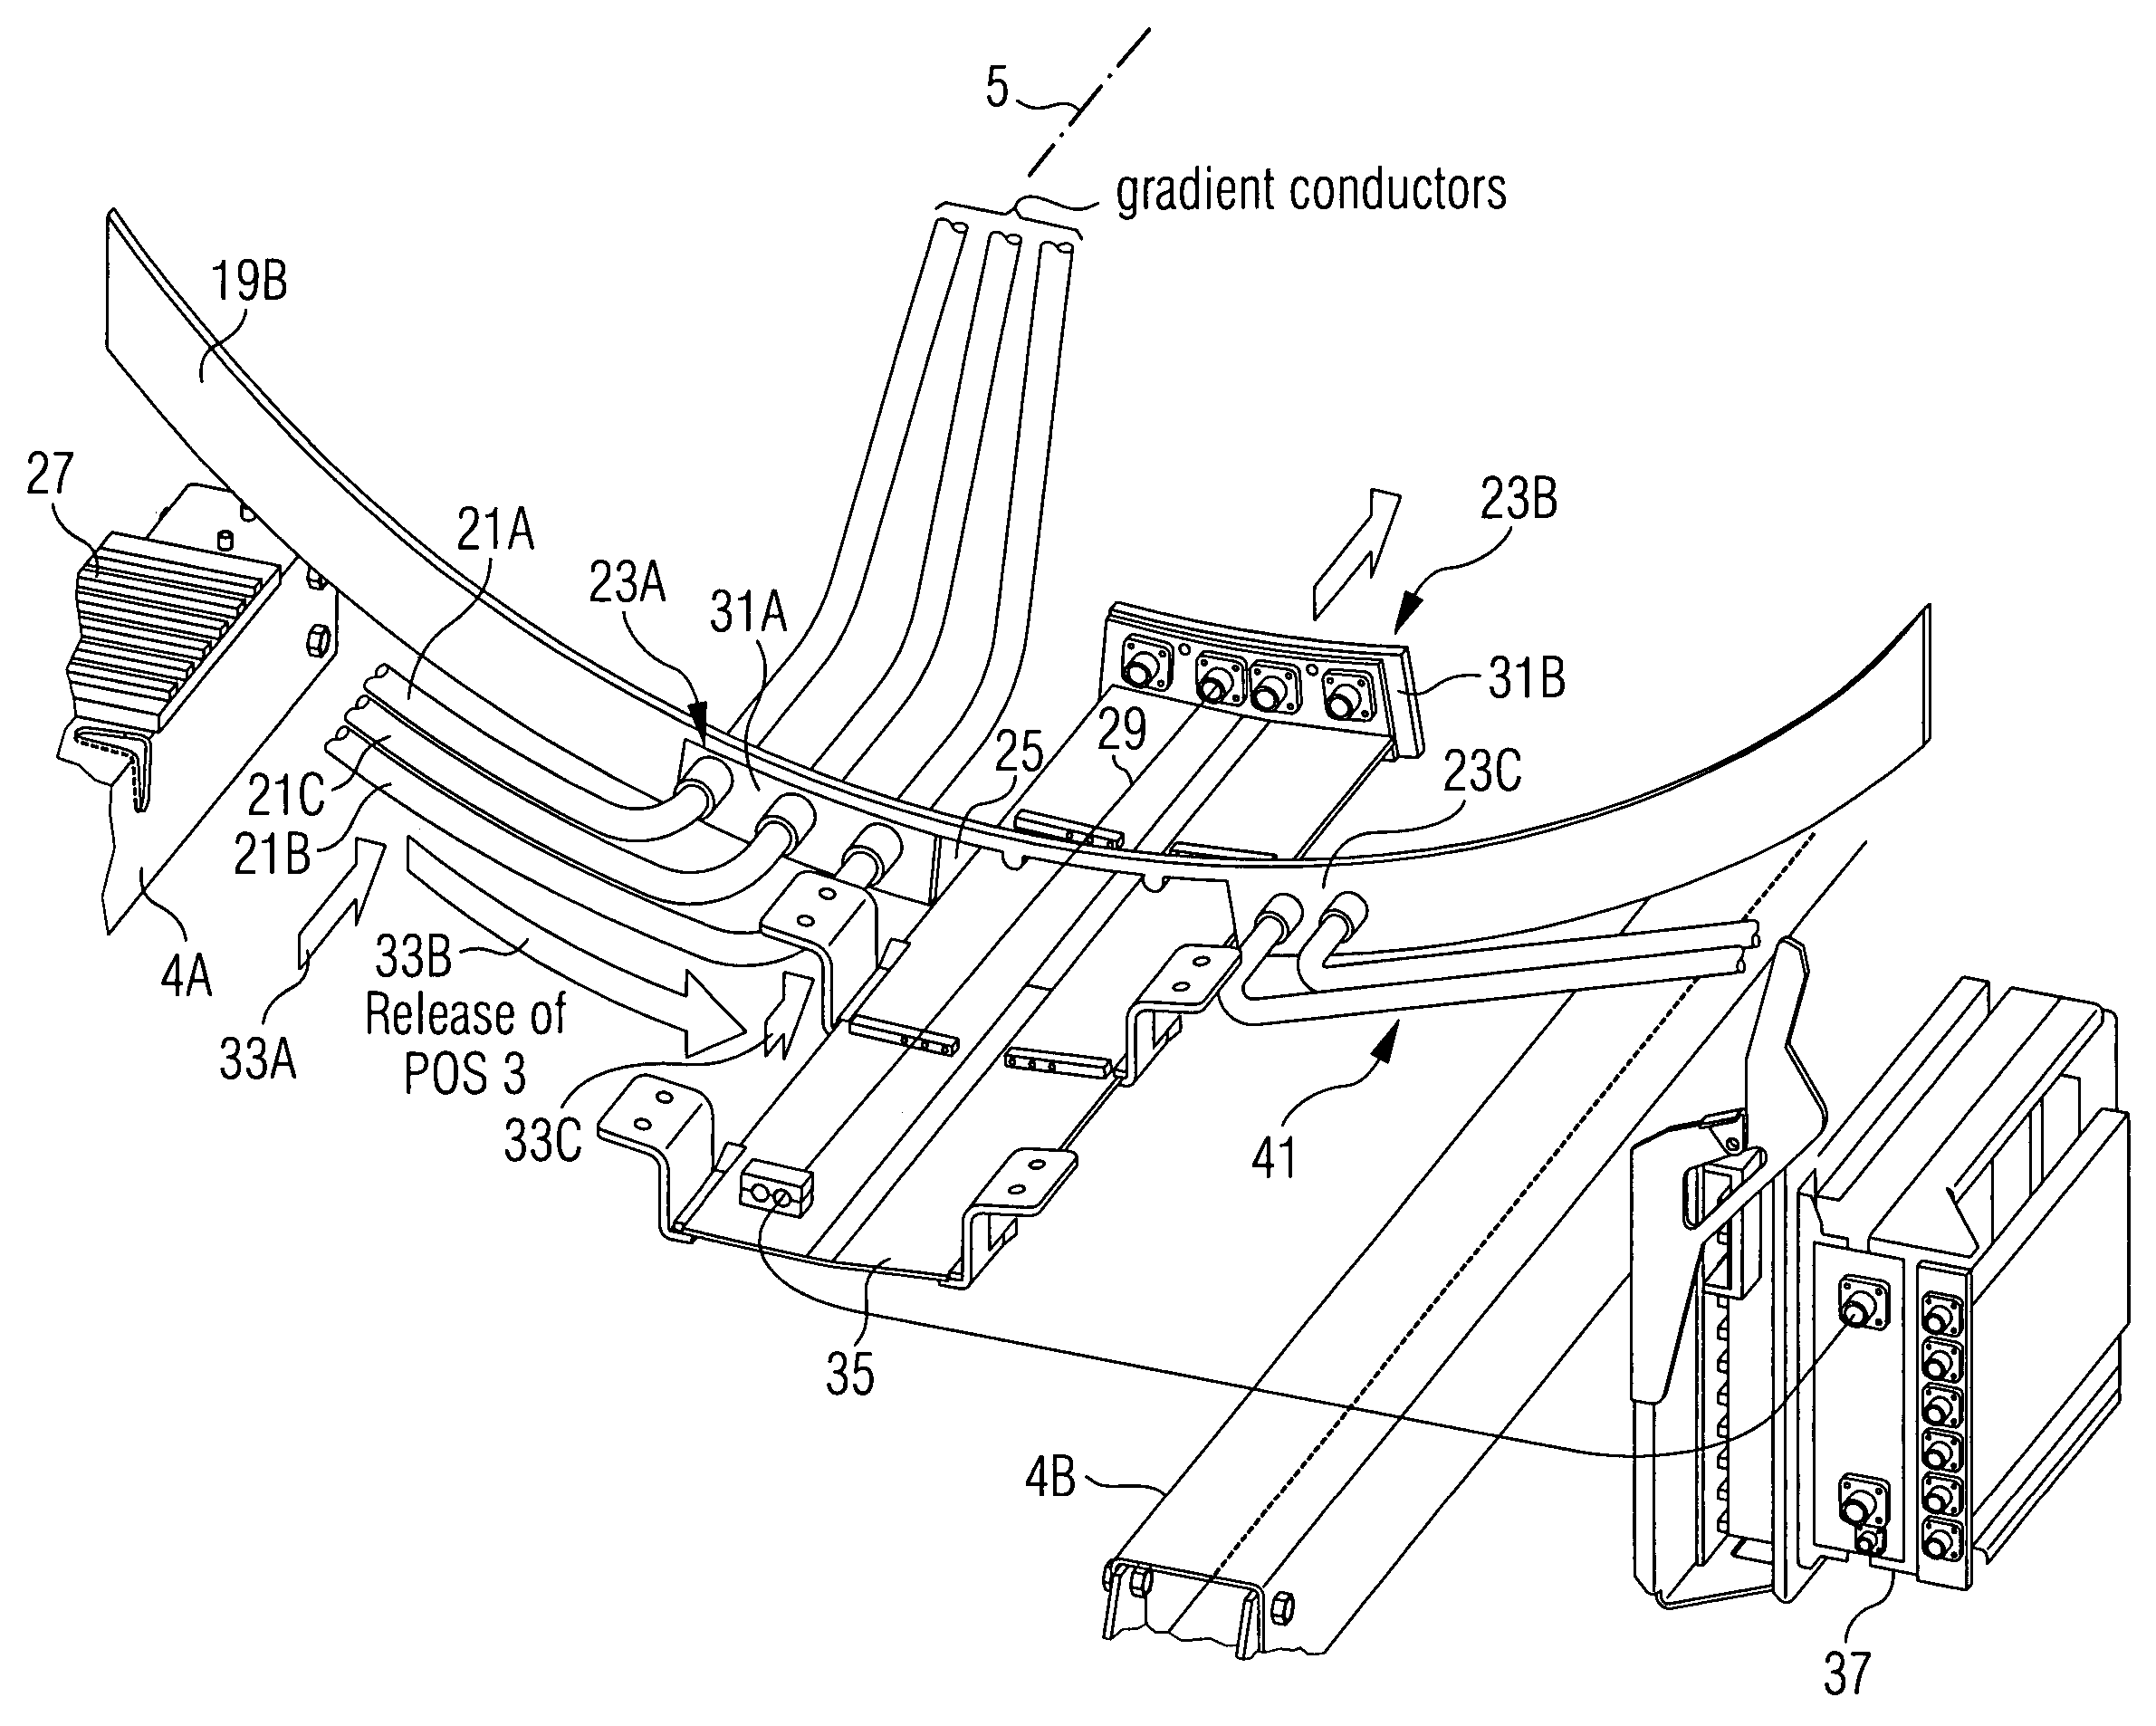 Vacuum housing for a magnetic resonance apparatus